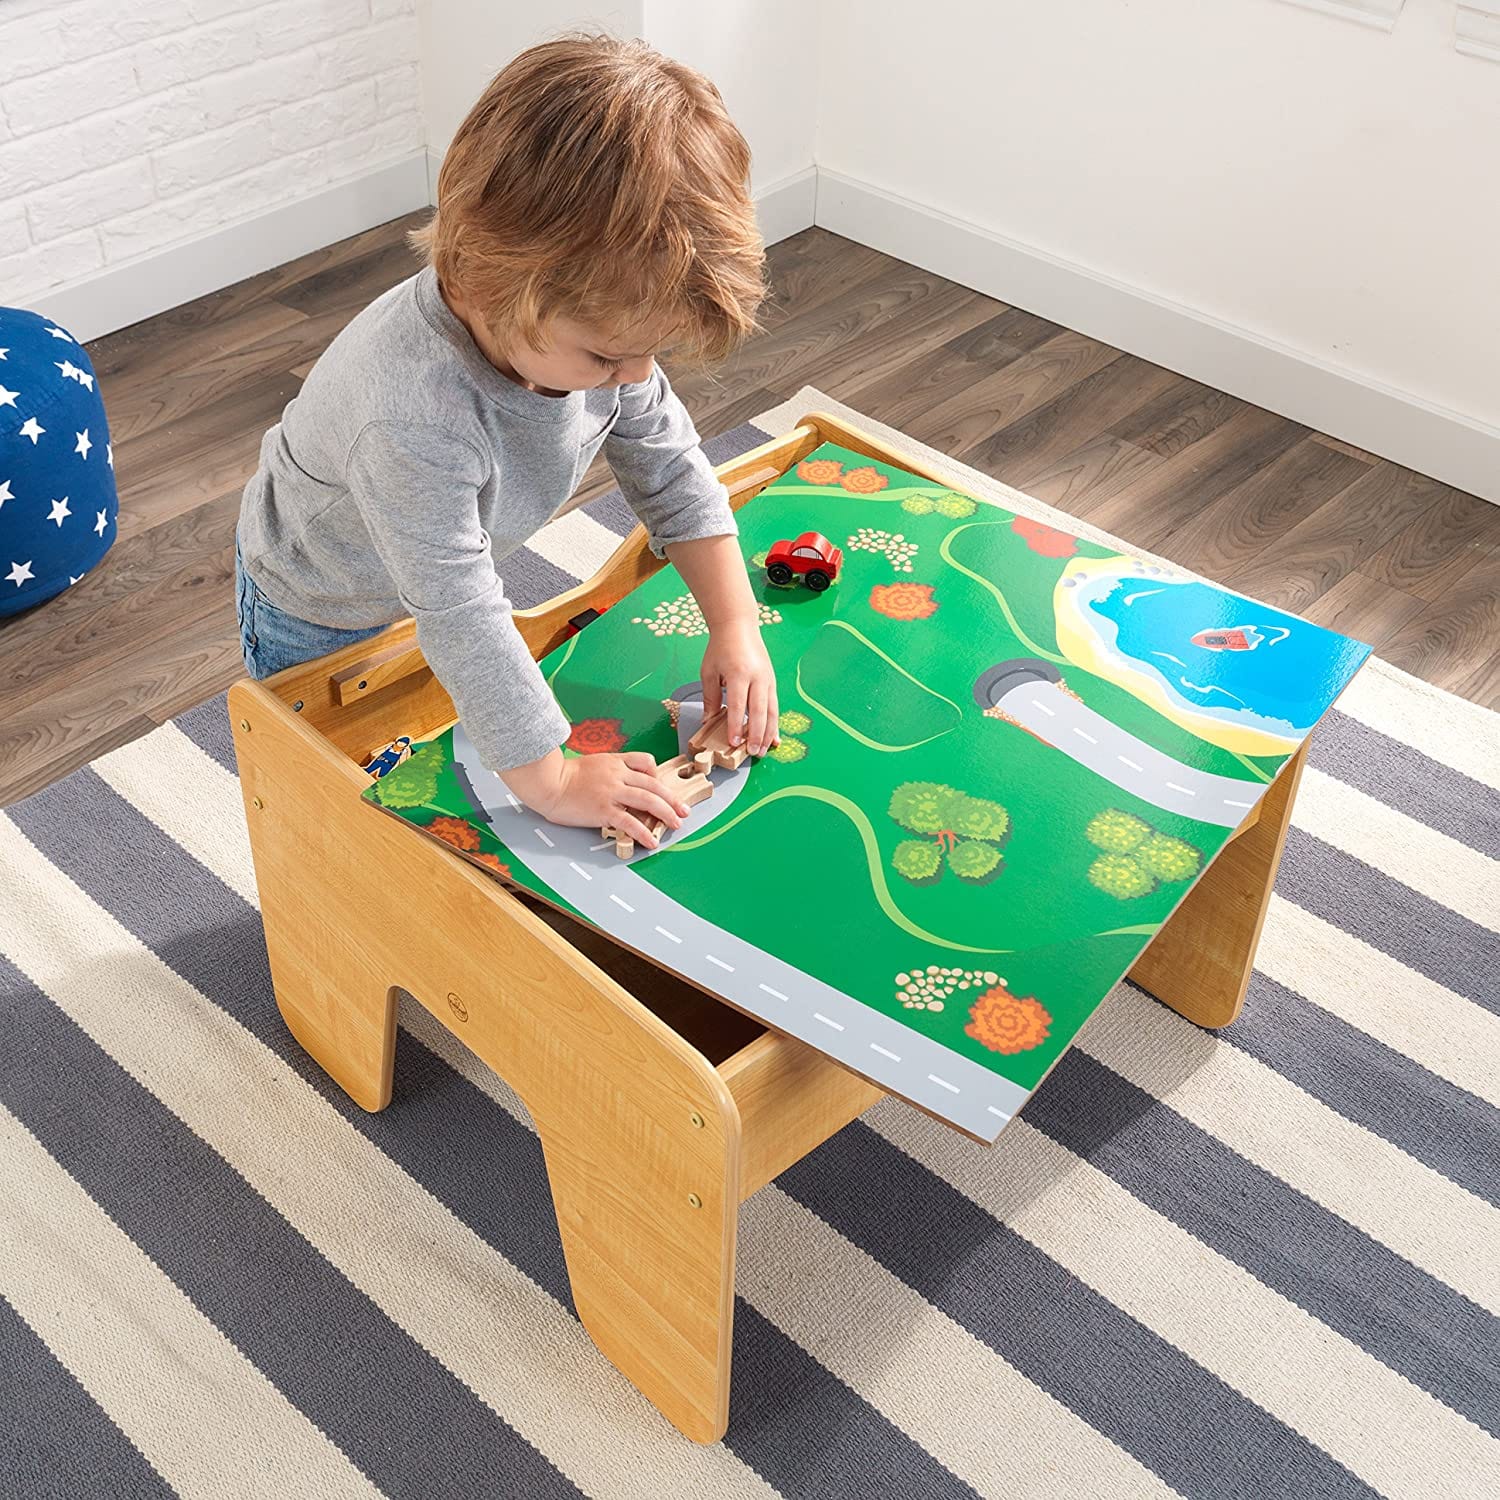 Lego Compatible 2 In 1 Activity Table For Kids (Natural